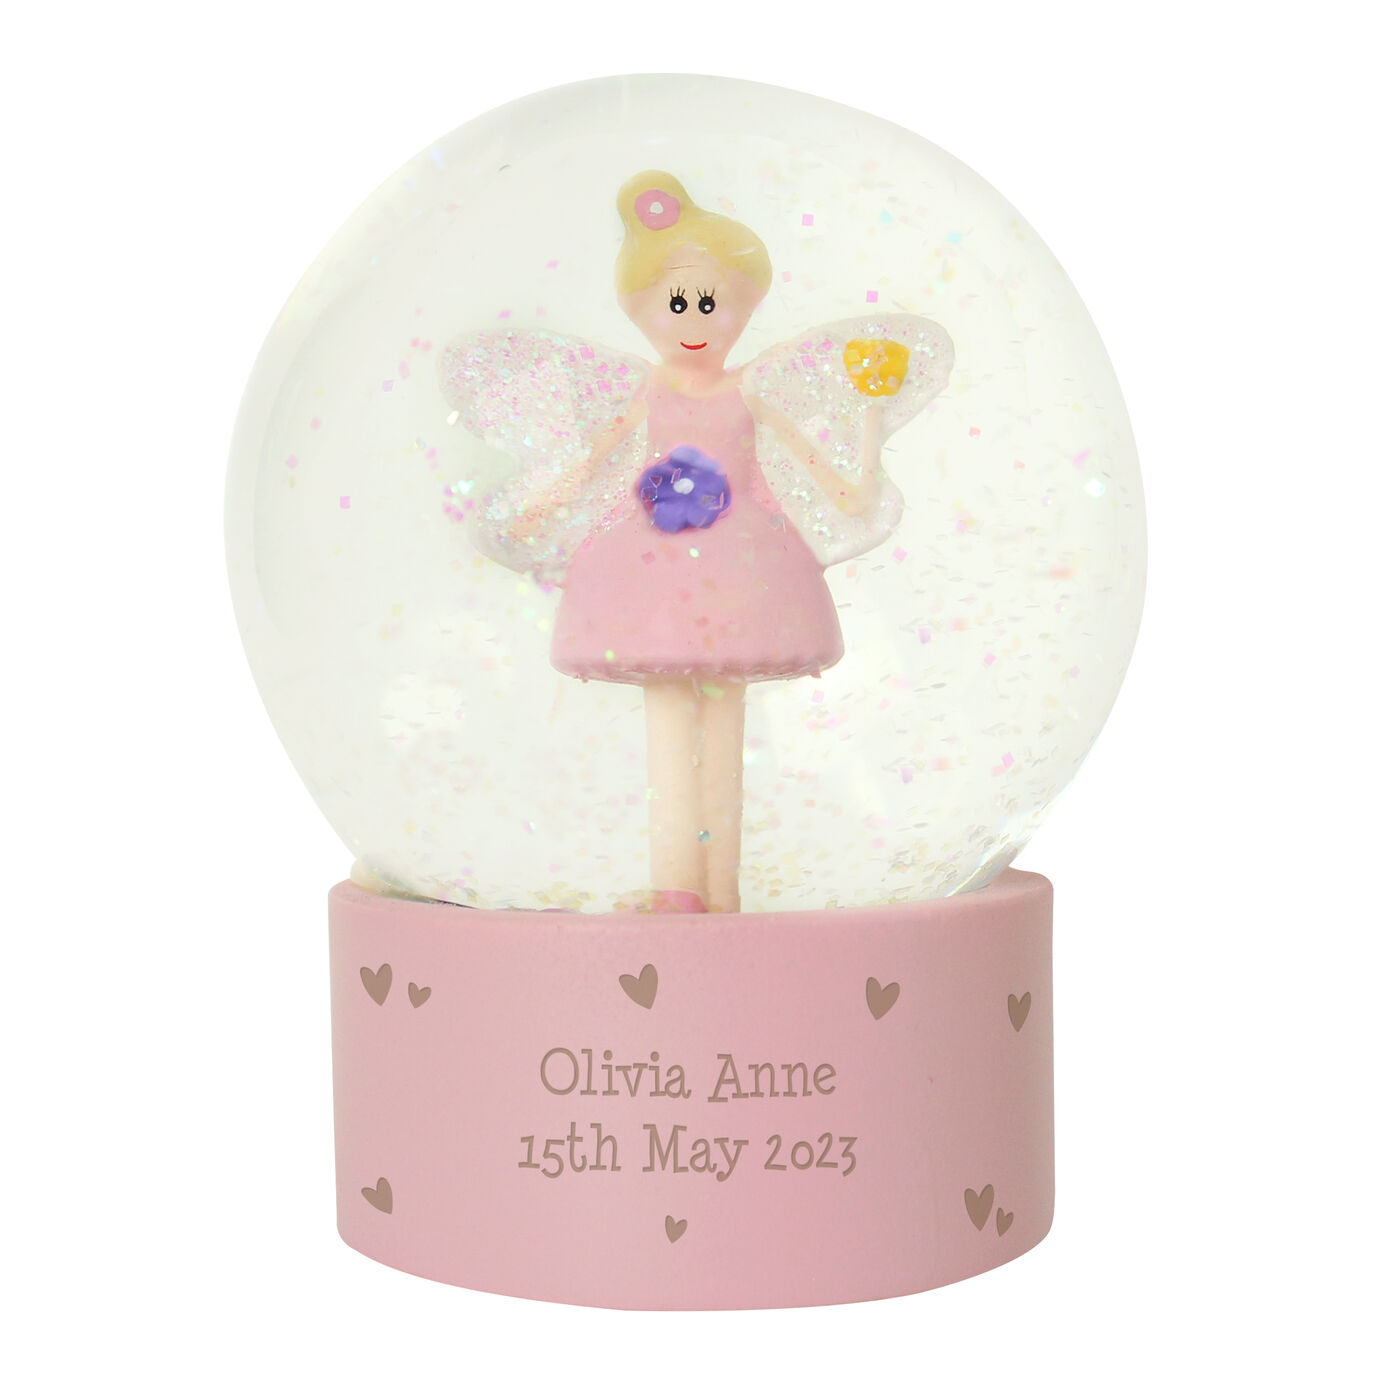 Personalised Rocking Horse Glitter Snow Globe - Add Name or Message